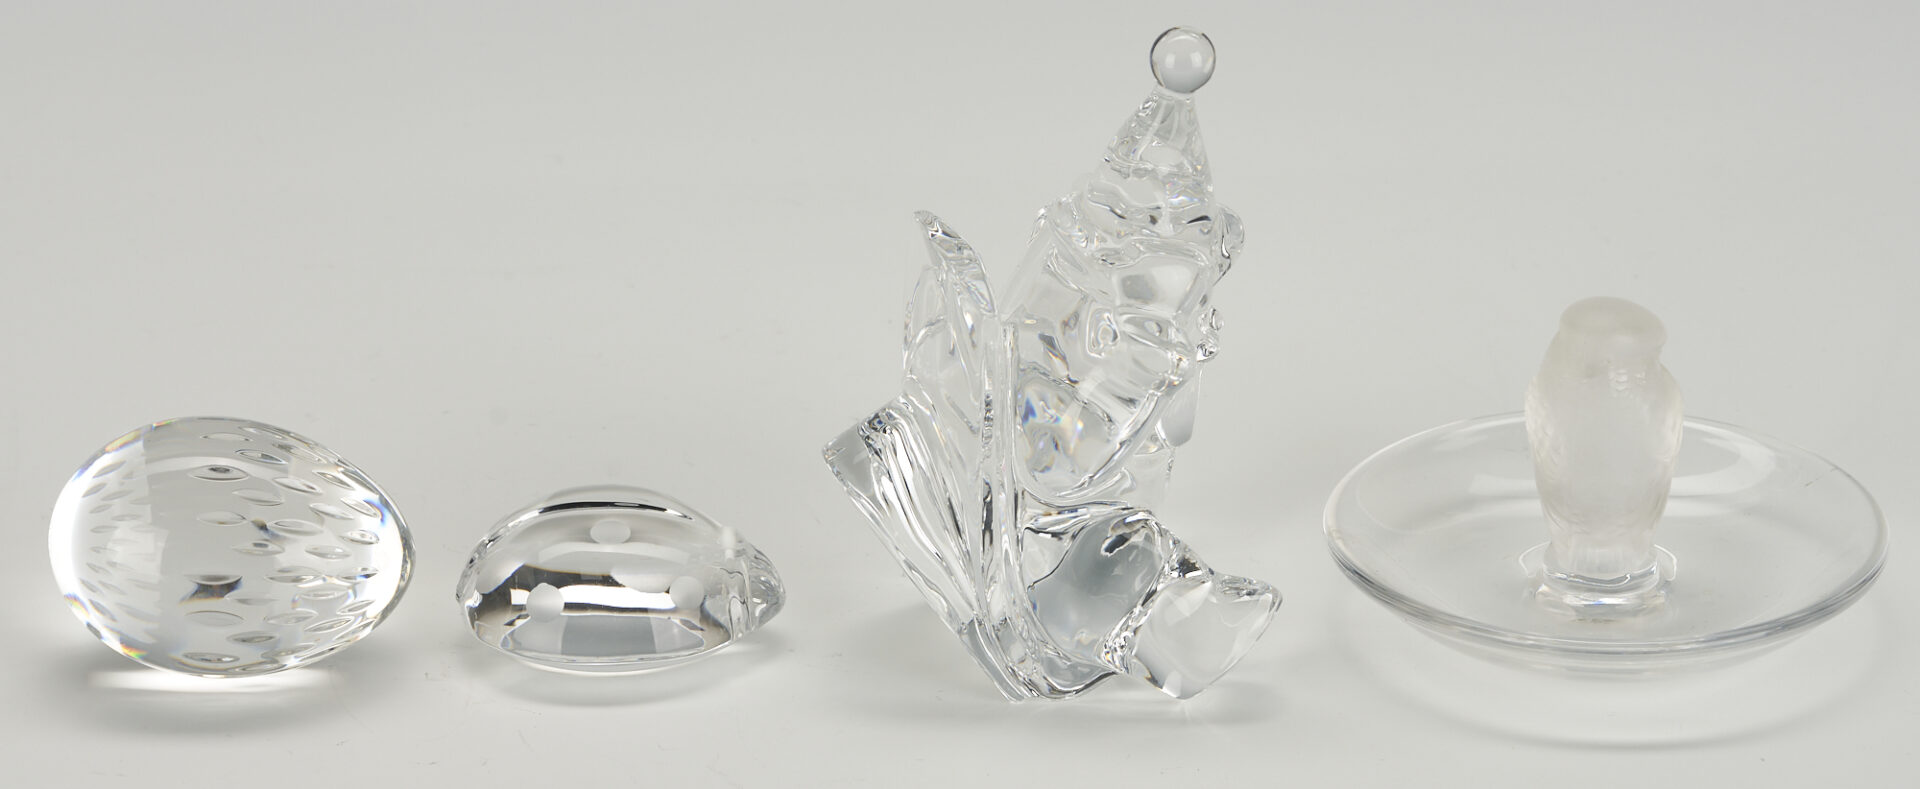 Lot 947: Grouping of 8 Figural Crystal Items, incl. Faberge, Baccarat, & Lalique